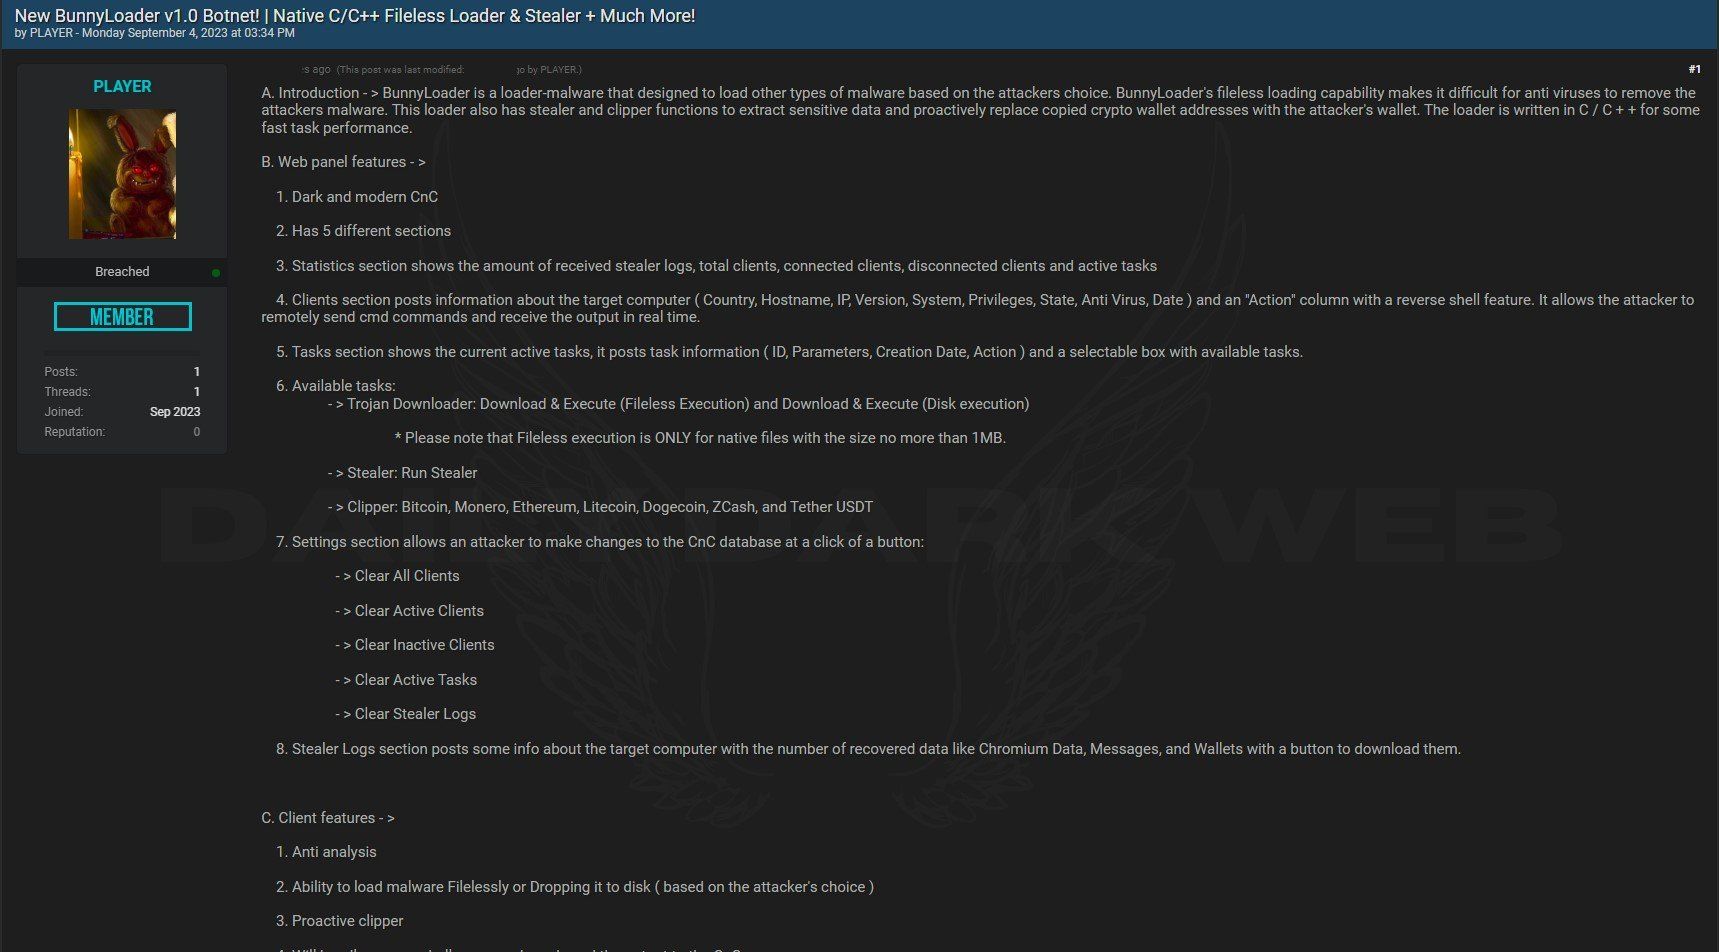 Image 1 is a screenshot of a forum post on the dark web advertising BunnyLoader. The post was made Monday, September 4, 2023 by member PLAYER. The title of the post is New BunnyLoader, v1.0 Botnet! C/C++ fileless loader and stealer + much more! It introduces what it does, and discusses its different features. It also lists the features for the client. It is posted by a user named breach. The post was made on Monday, September 4, 2023. 